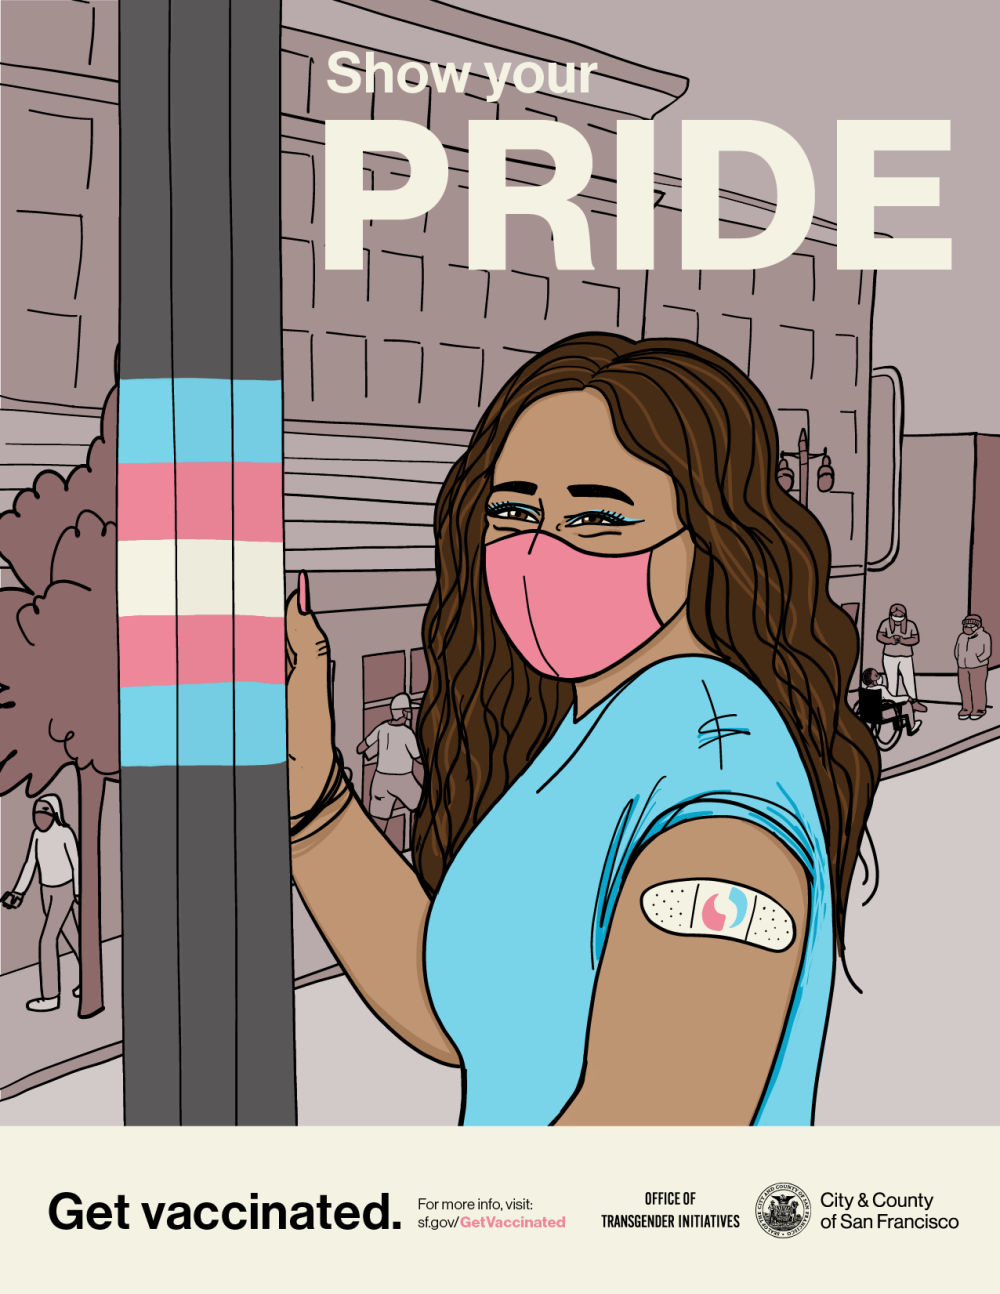 Drawing of a person with long brown hair wearing a mask and bandaid on their arm, and standing next to a pole in the Trans District with the trans pride flag colors.